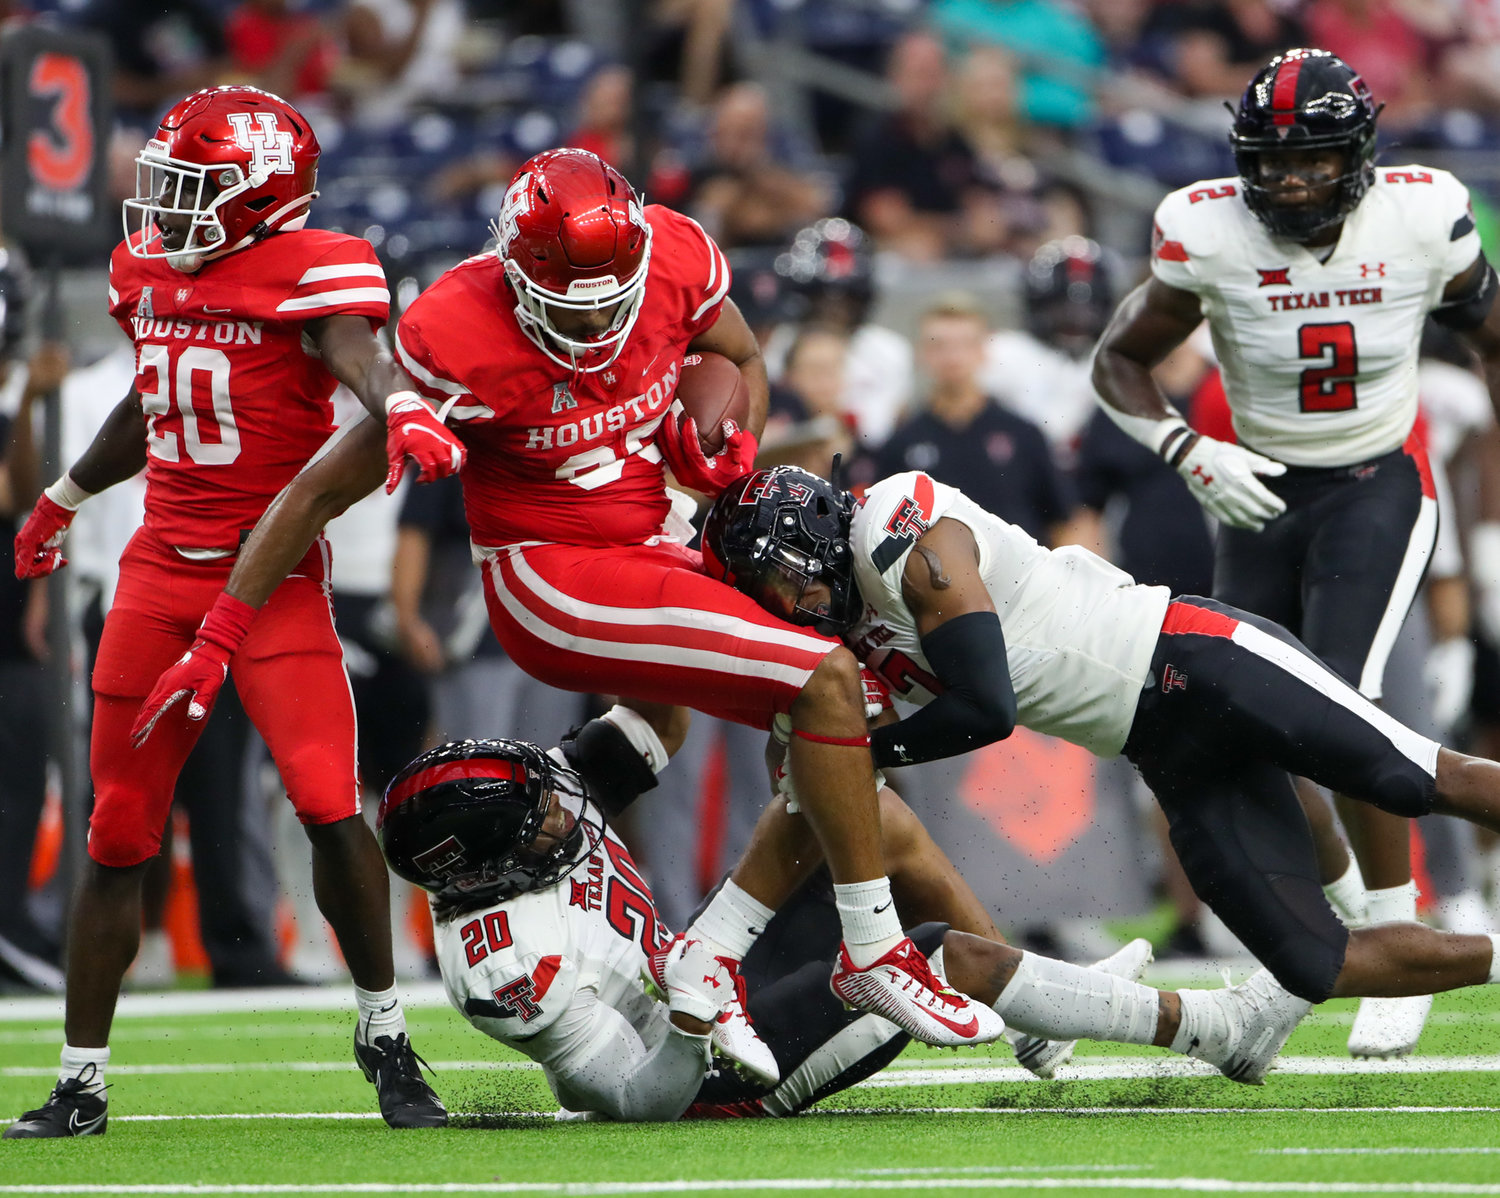 Houston Cougars tight end Christian Trahan (85) carries the ball during an NCAA football game between Houston and Texas Tech on September 4, 2021 in Houston, Texas.